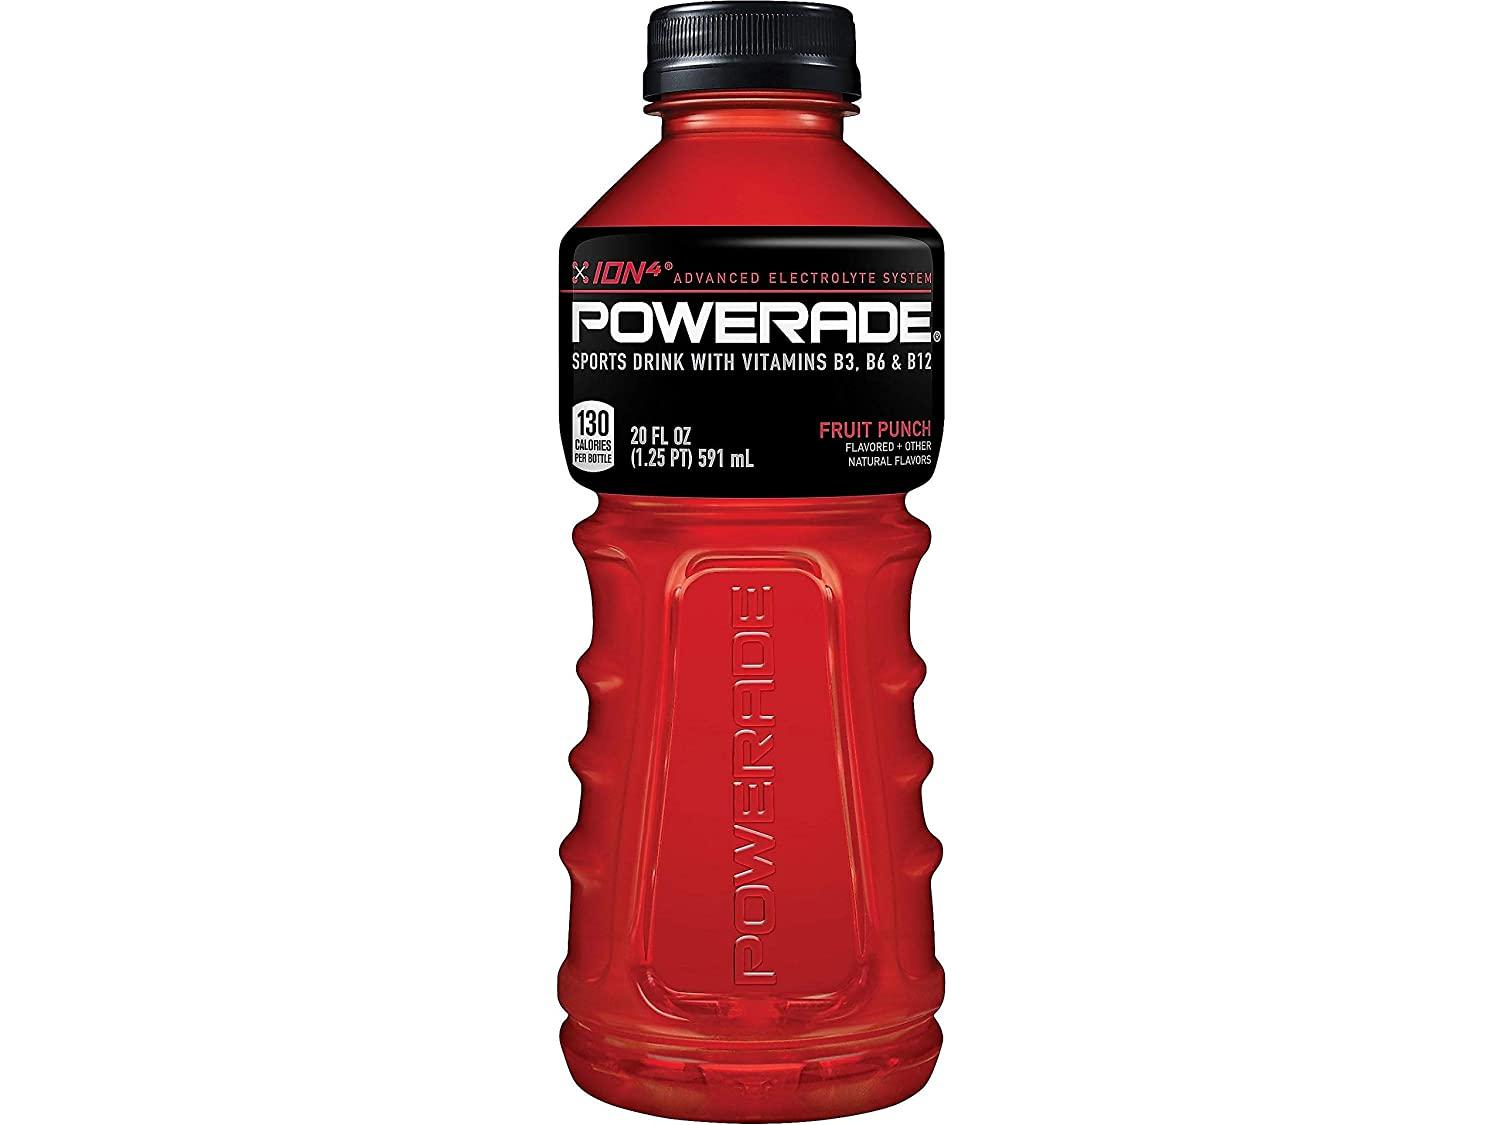 POWERADE, Electrolyte Enhanced Sports Drinks with Vitamins, Fruit Punch, 20 fl oz, 24 Pack